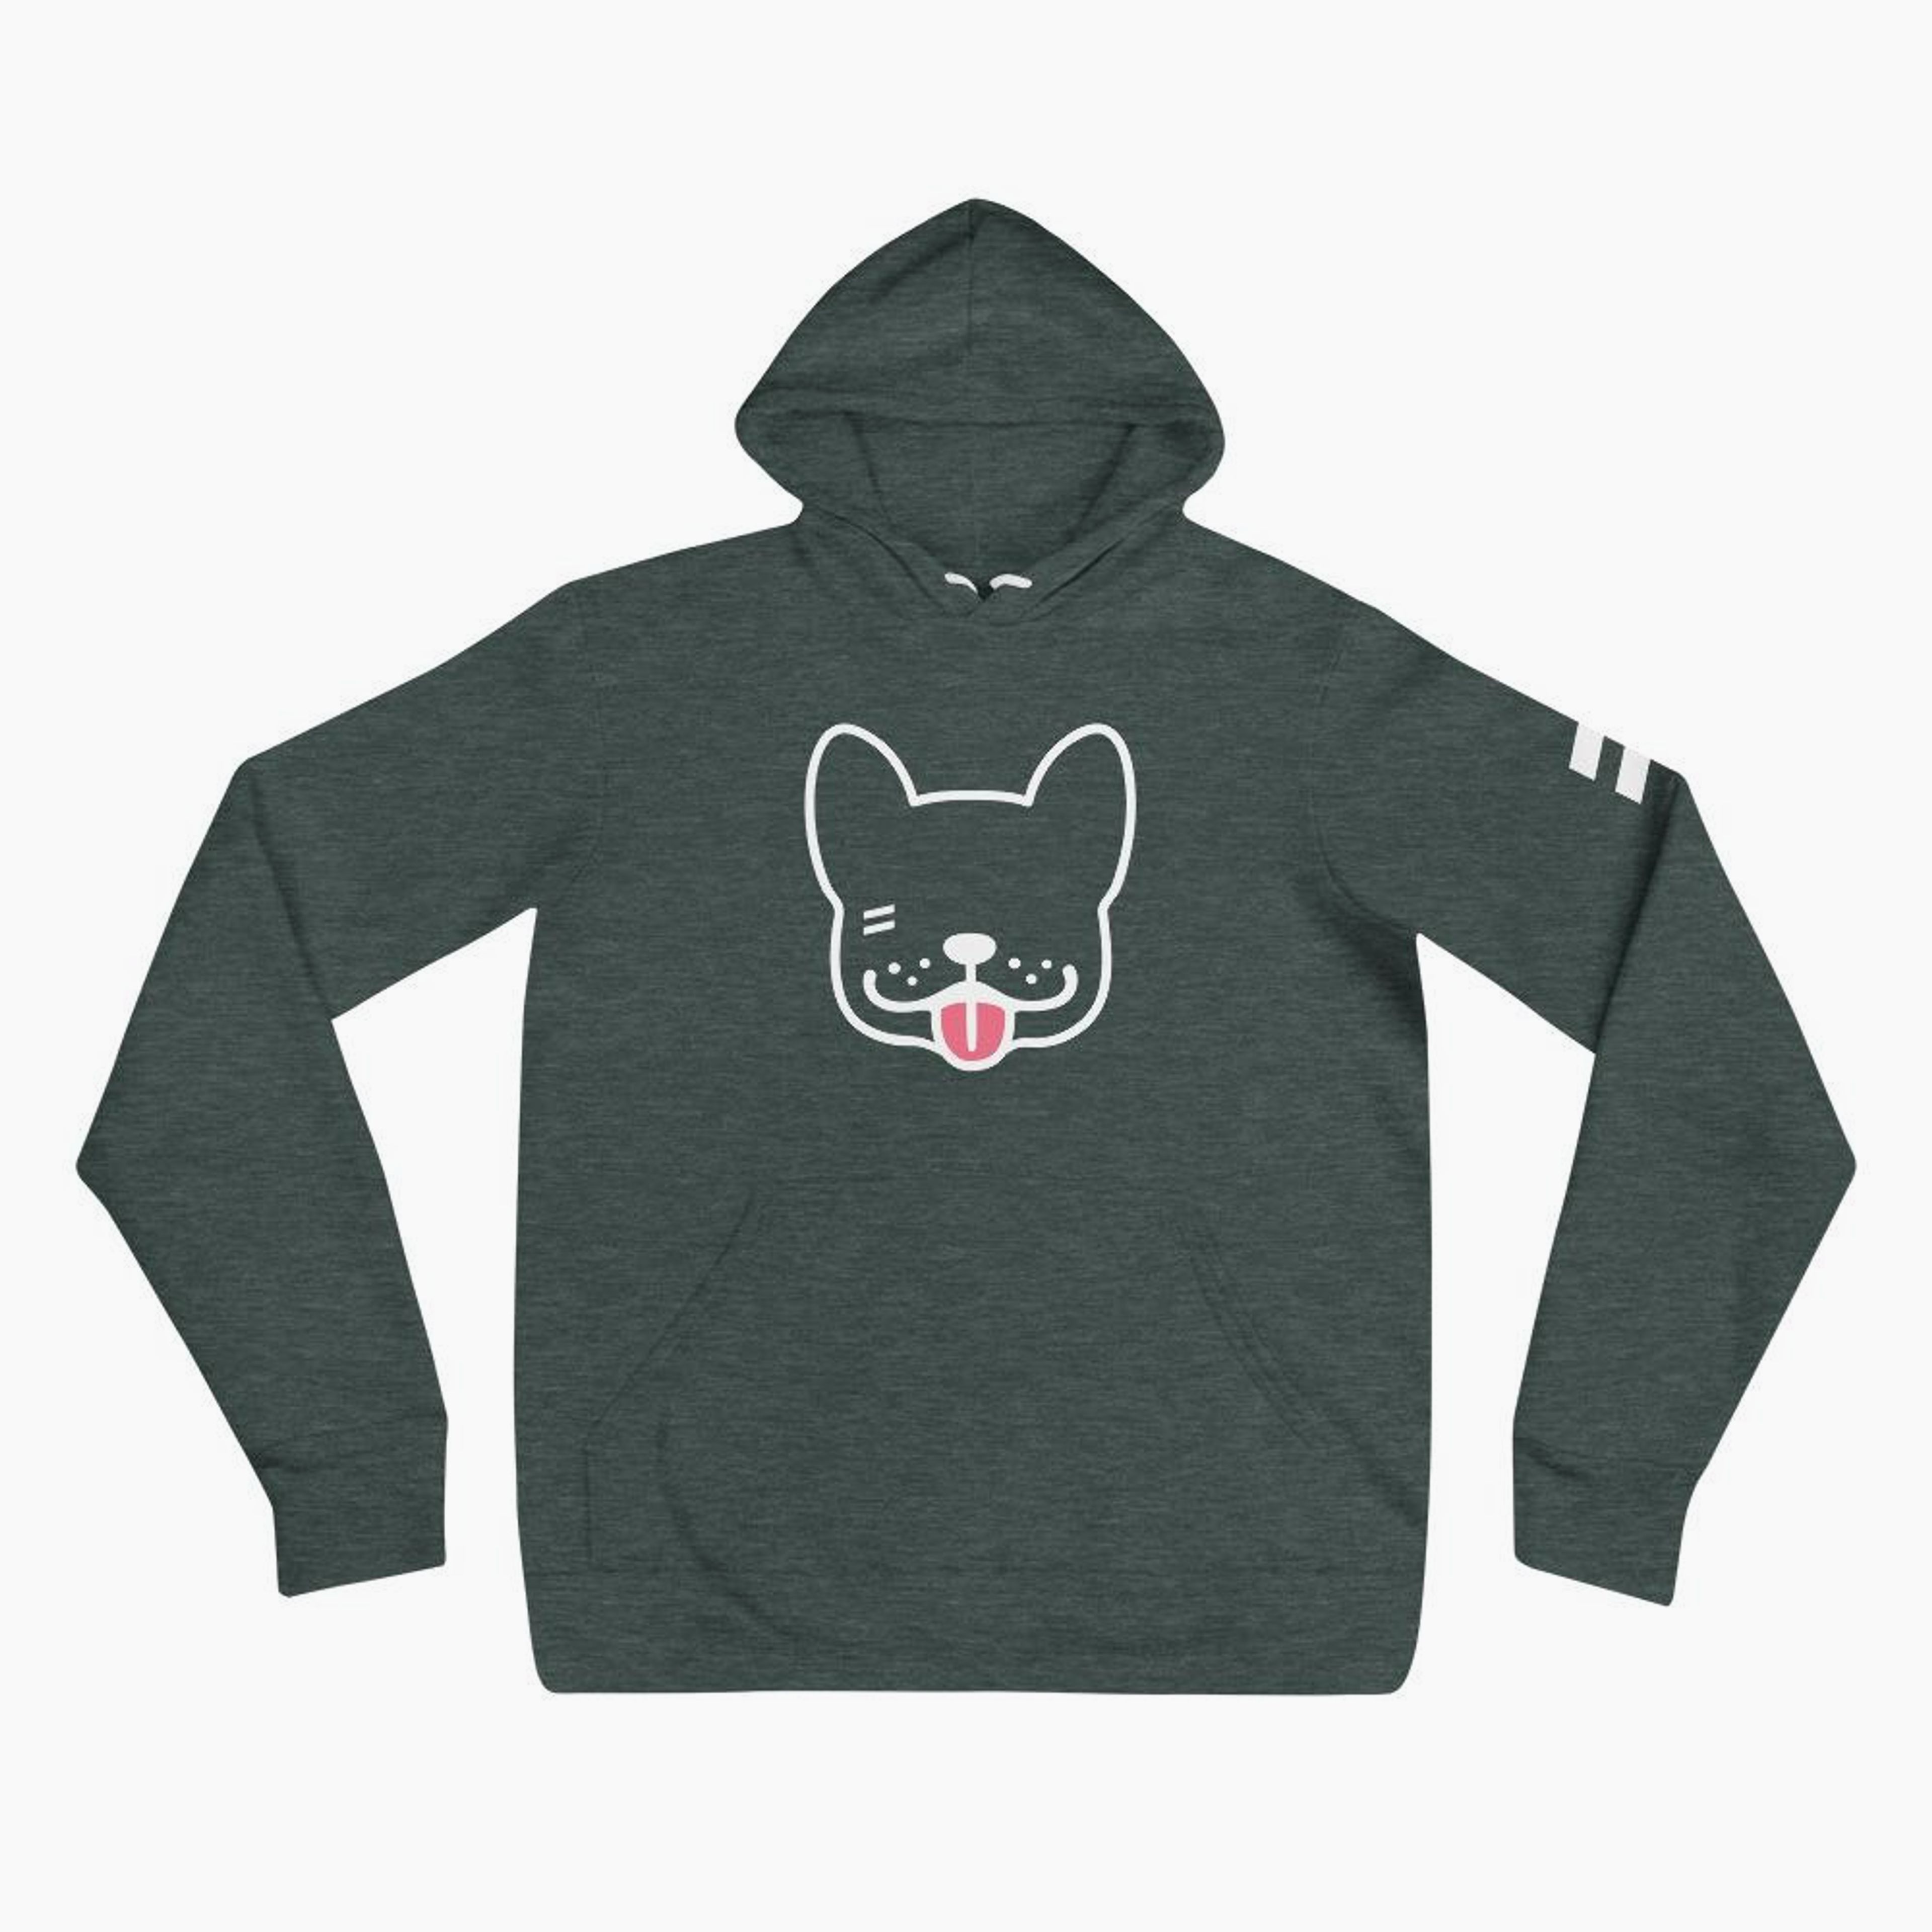 Tongue Out - Unisex hoodie